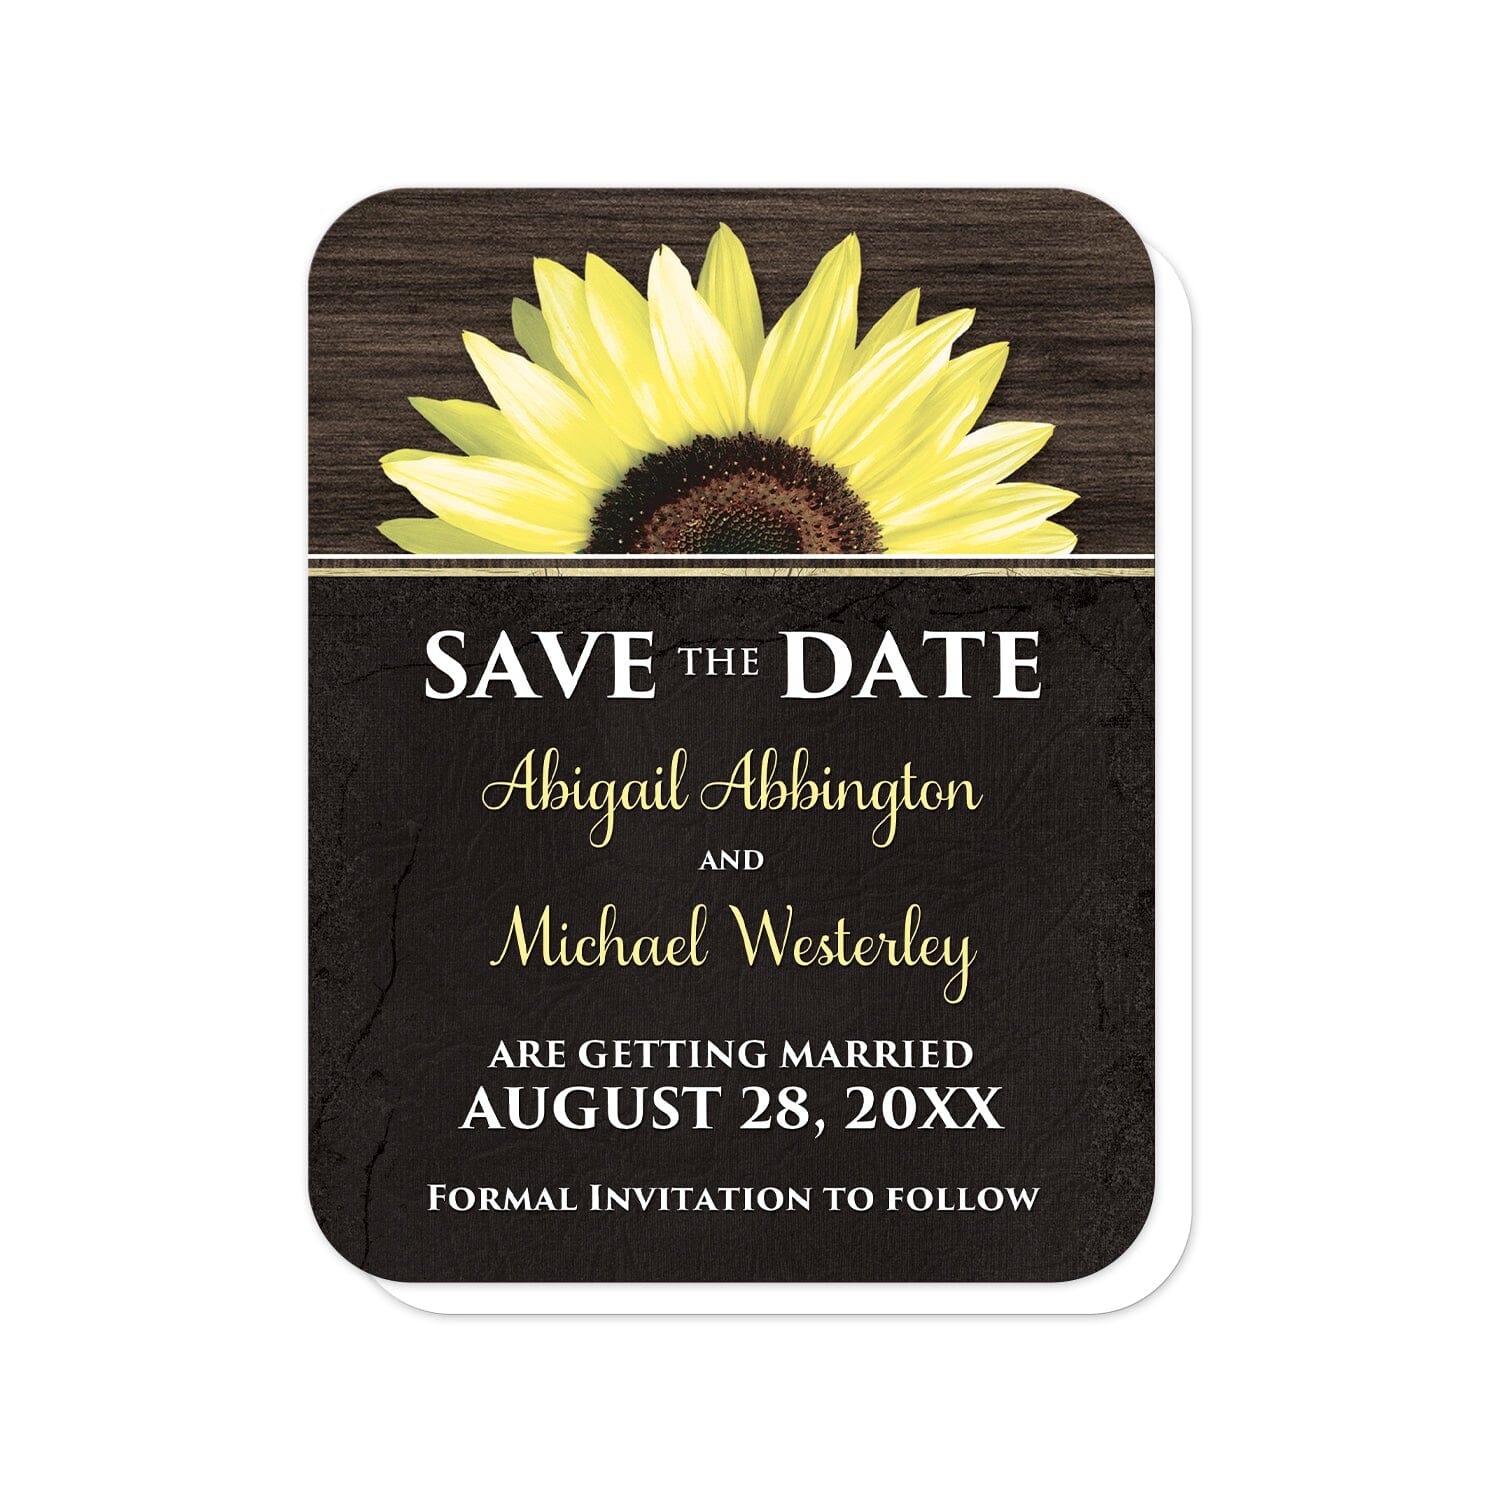 Rustic Sunflower with Black Save the Date Cards (with rounded corners) at Artistically Invited. Country-inspired rustic sunflower with black save the date cards featuring a vibrant bright yellow sunflower over a textured dark brown wood design along the top. Your personalized wedding date details are custom printed in yellow and white over a tattered black cloth illustration below the sunflower.